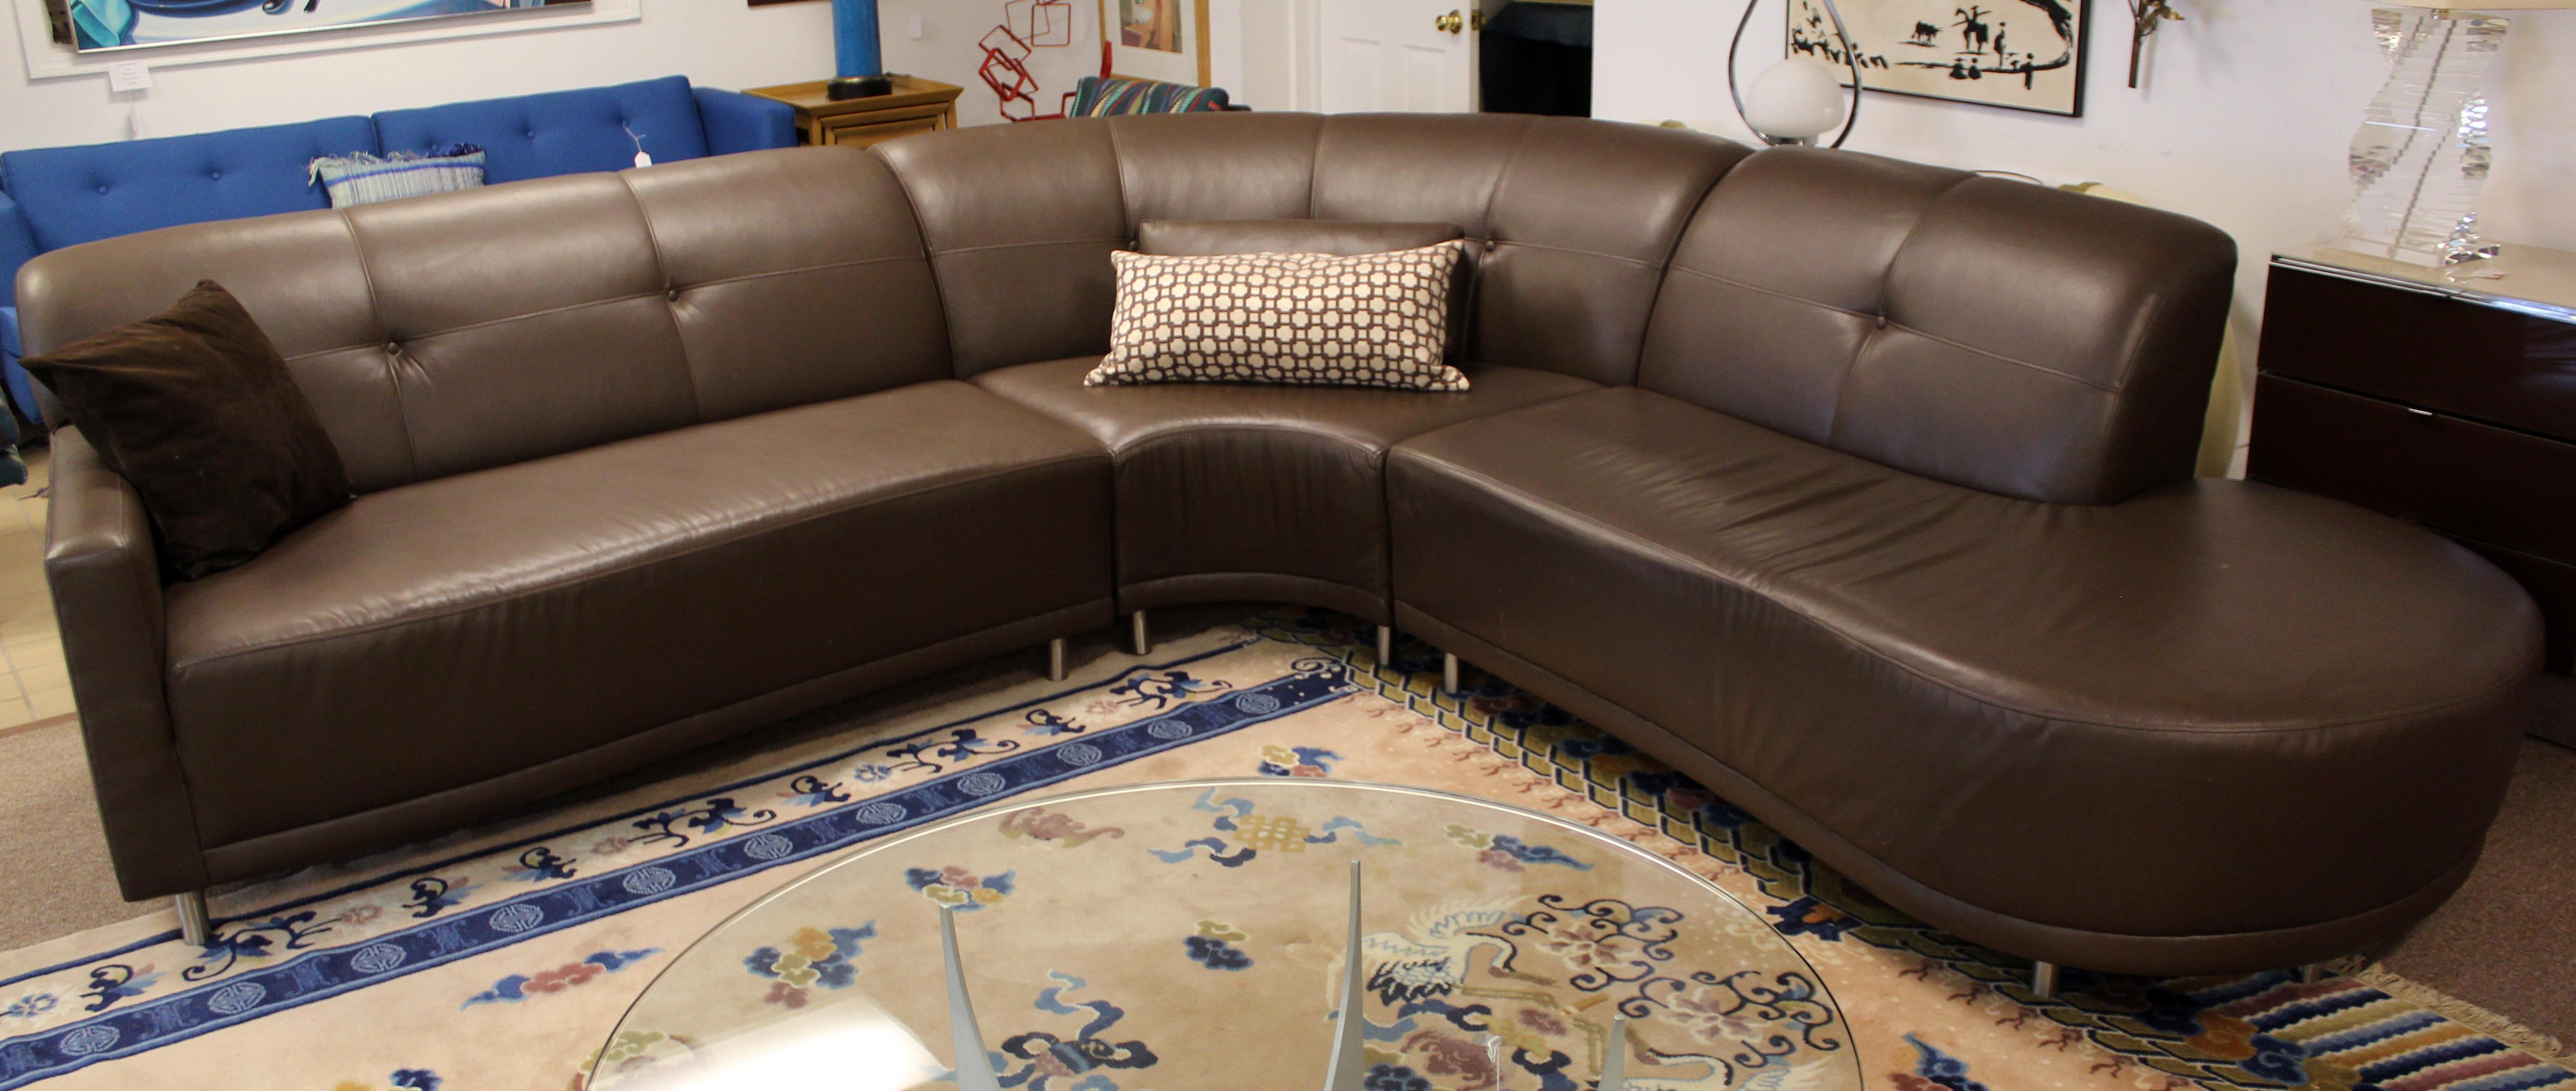 modern curved leather sectional sofa